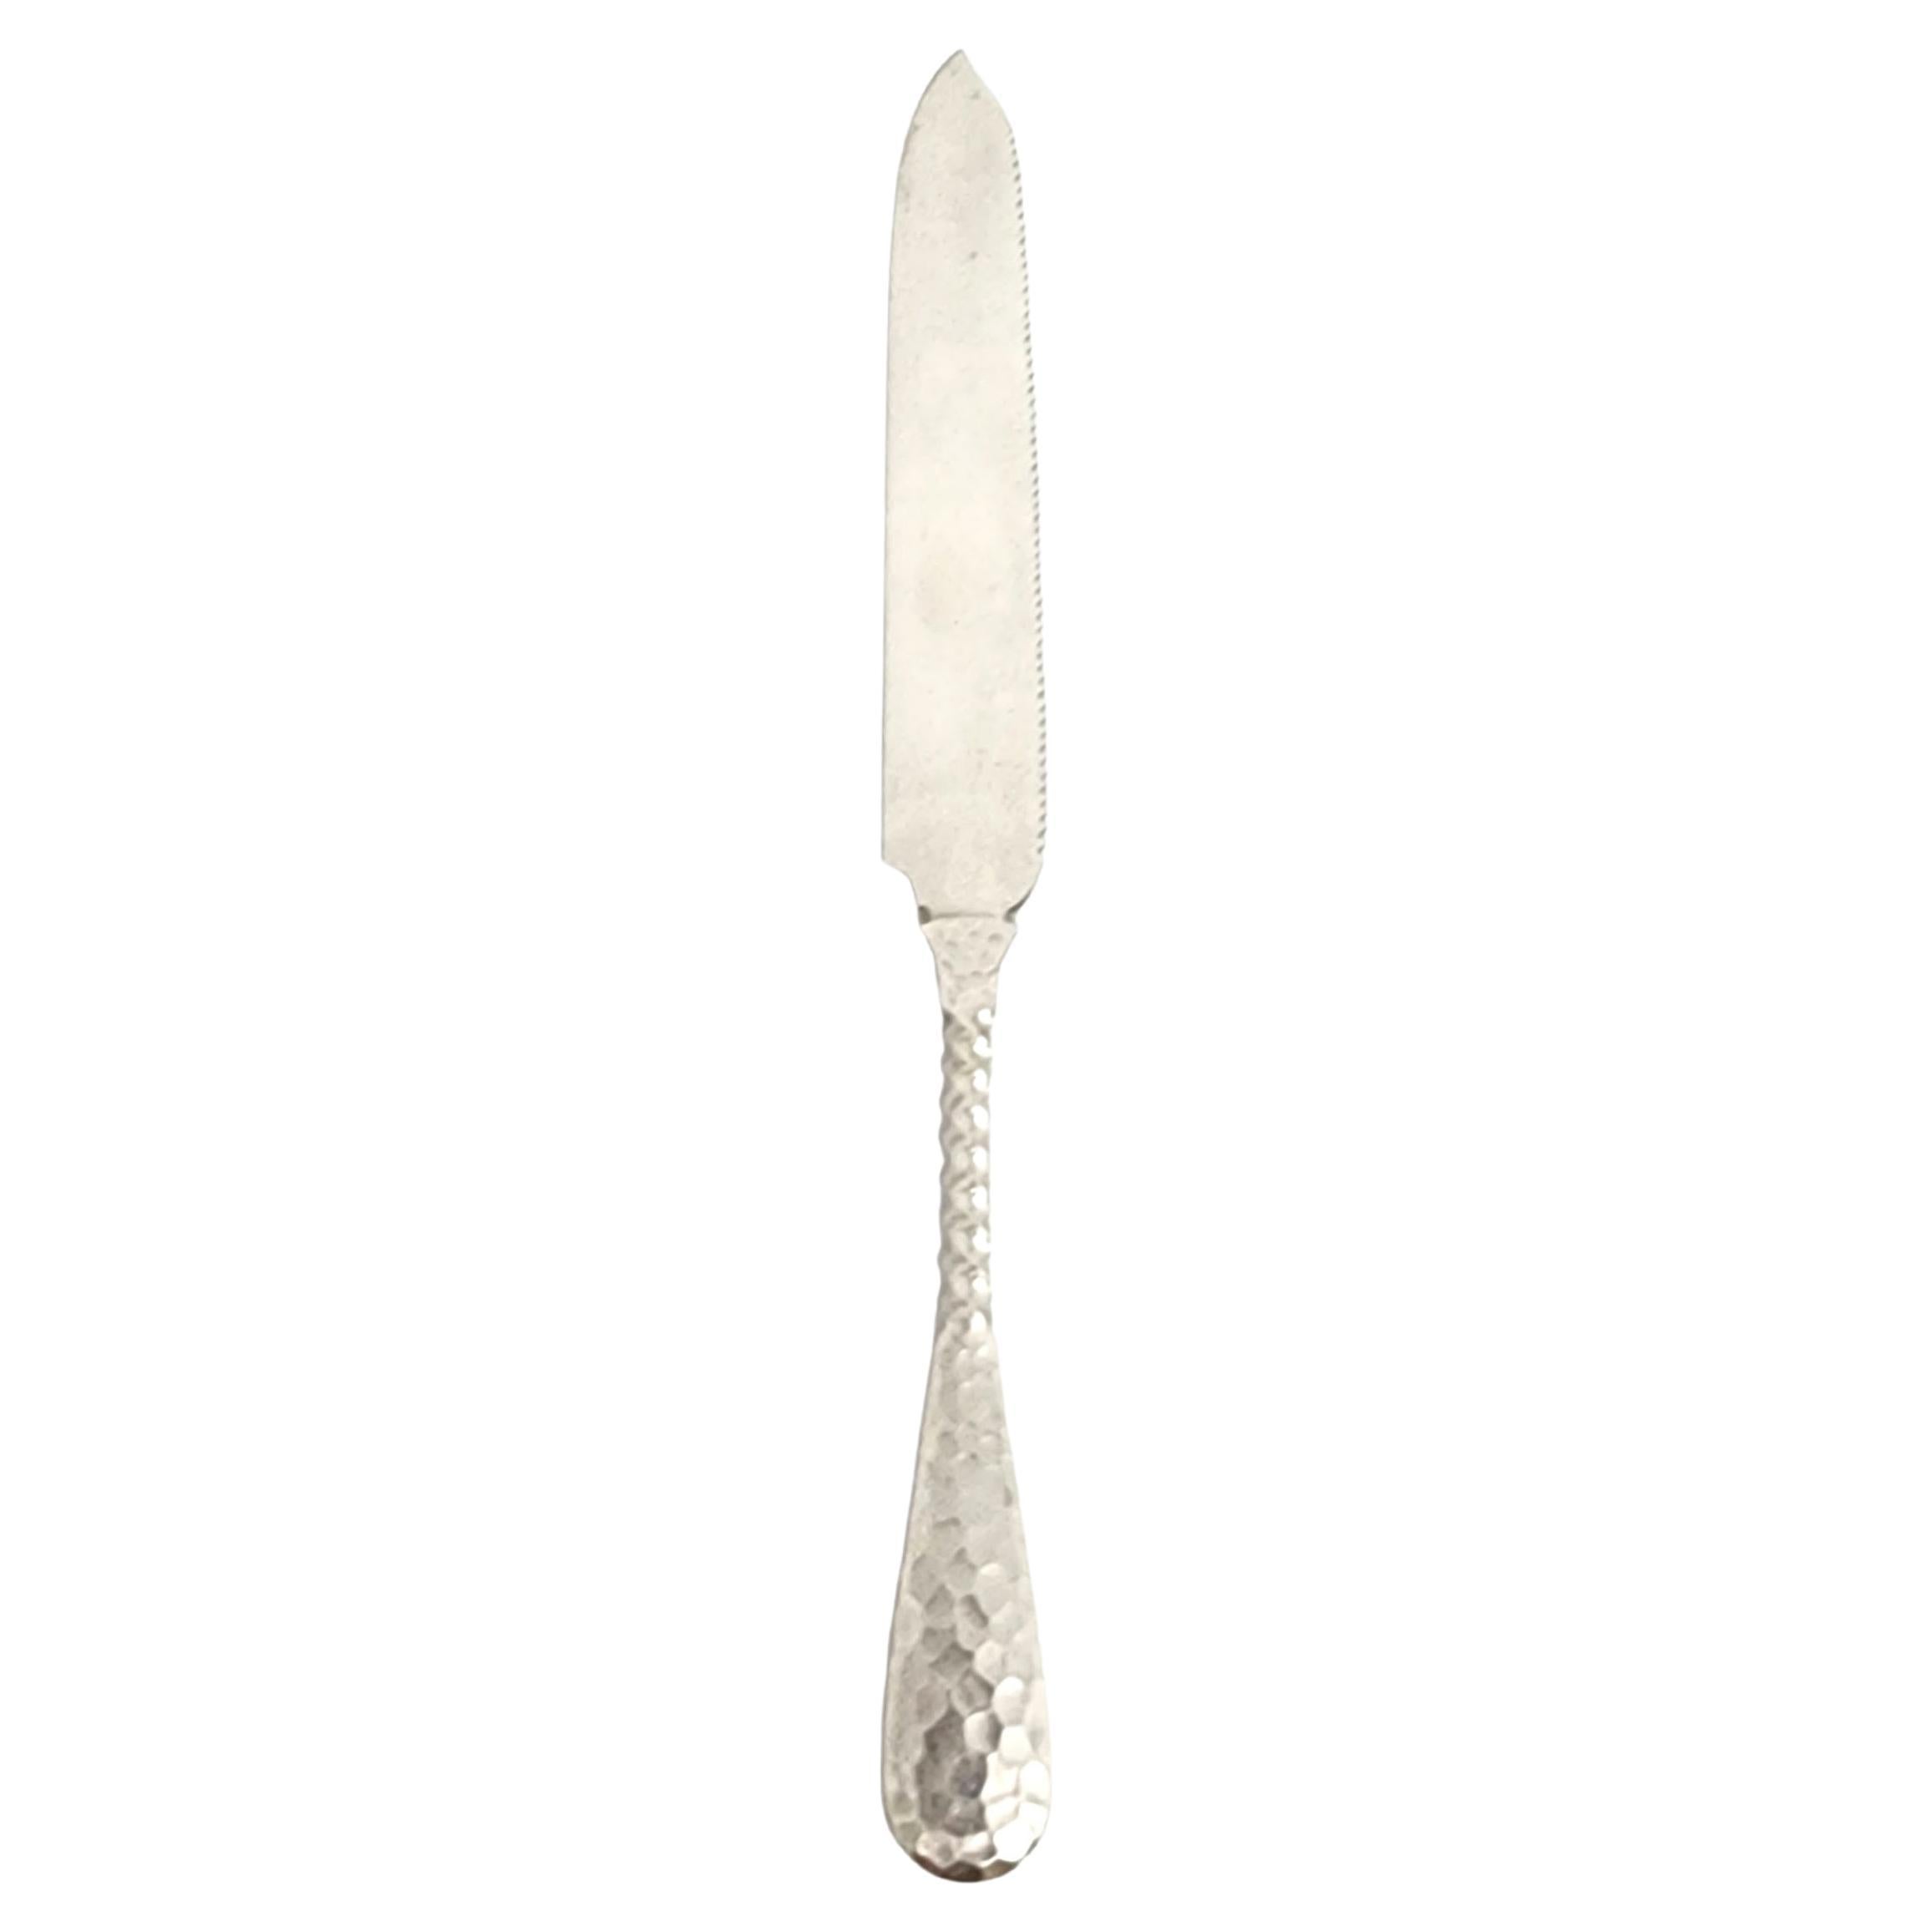 Dominick & Haff Sterling Silver Twist Hammered Handle Serrated Knife #13653